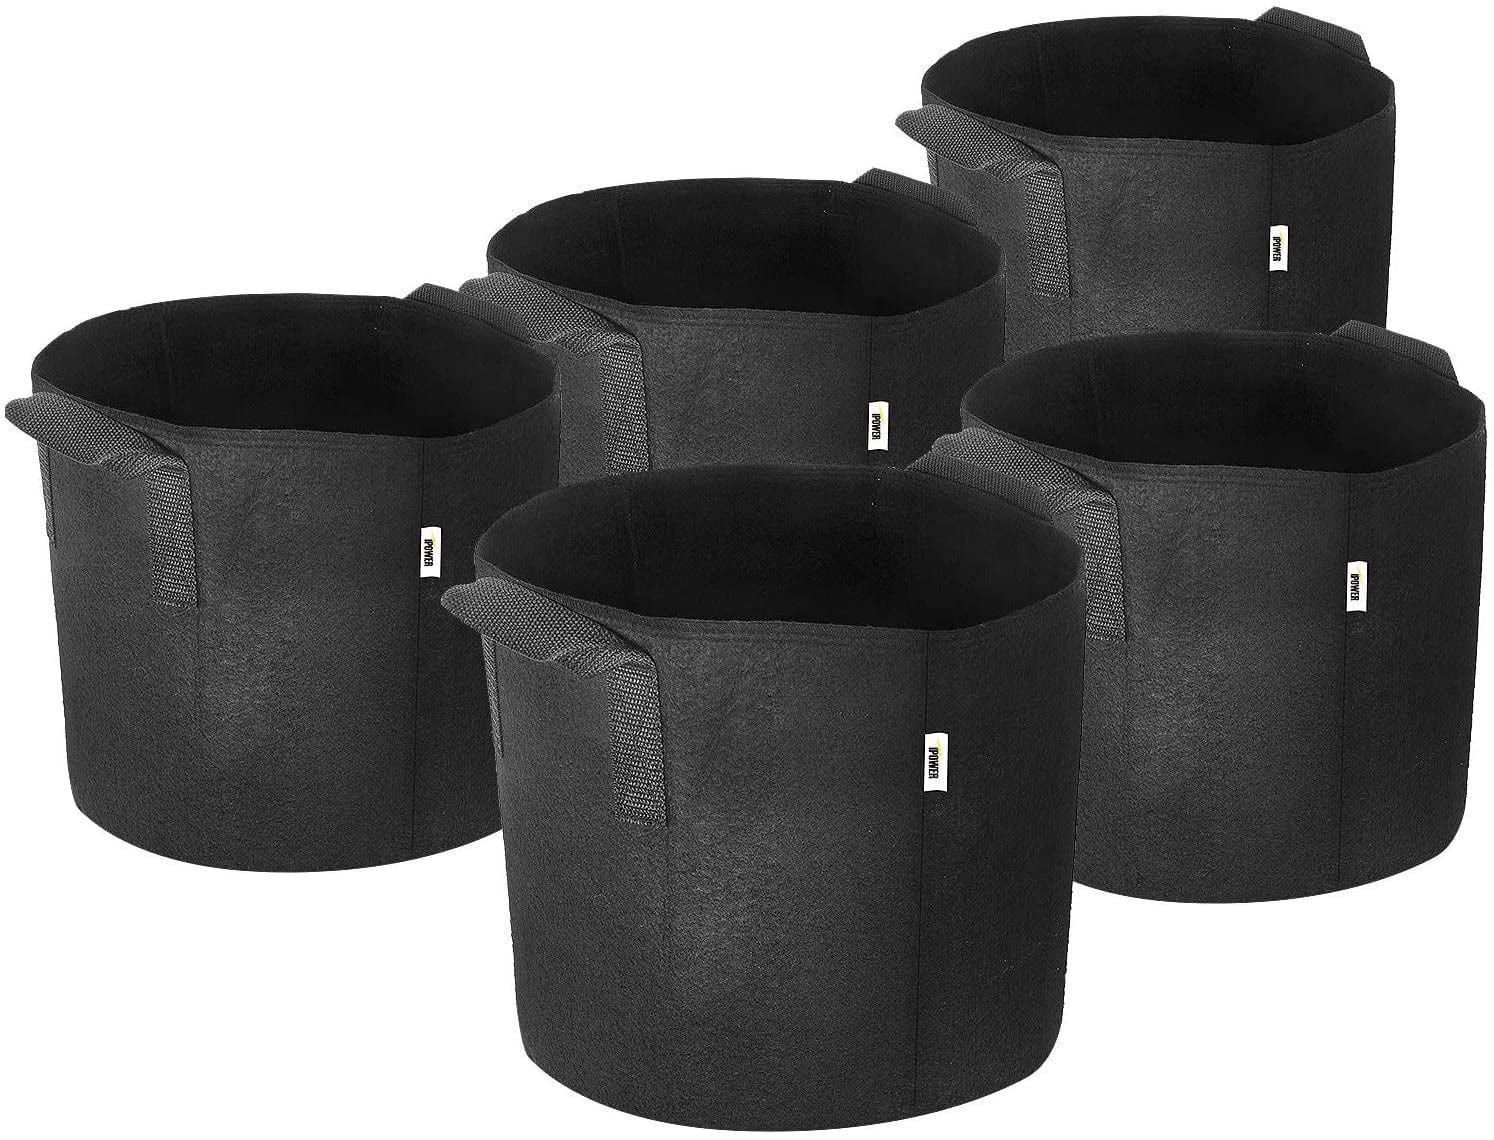 iPower Plant Grow Bag 15-Gallon 5-Pack Heavy Duty Fabric Pots, 300g Thickened Nonwoven Aeration Durable Container, Nylon Strap Handles for Gardening